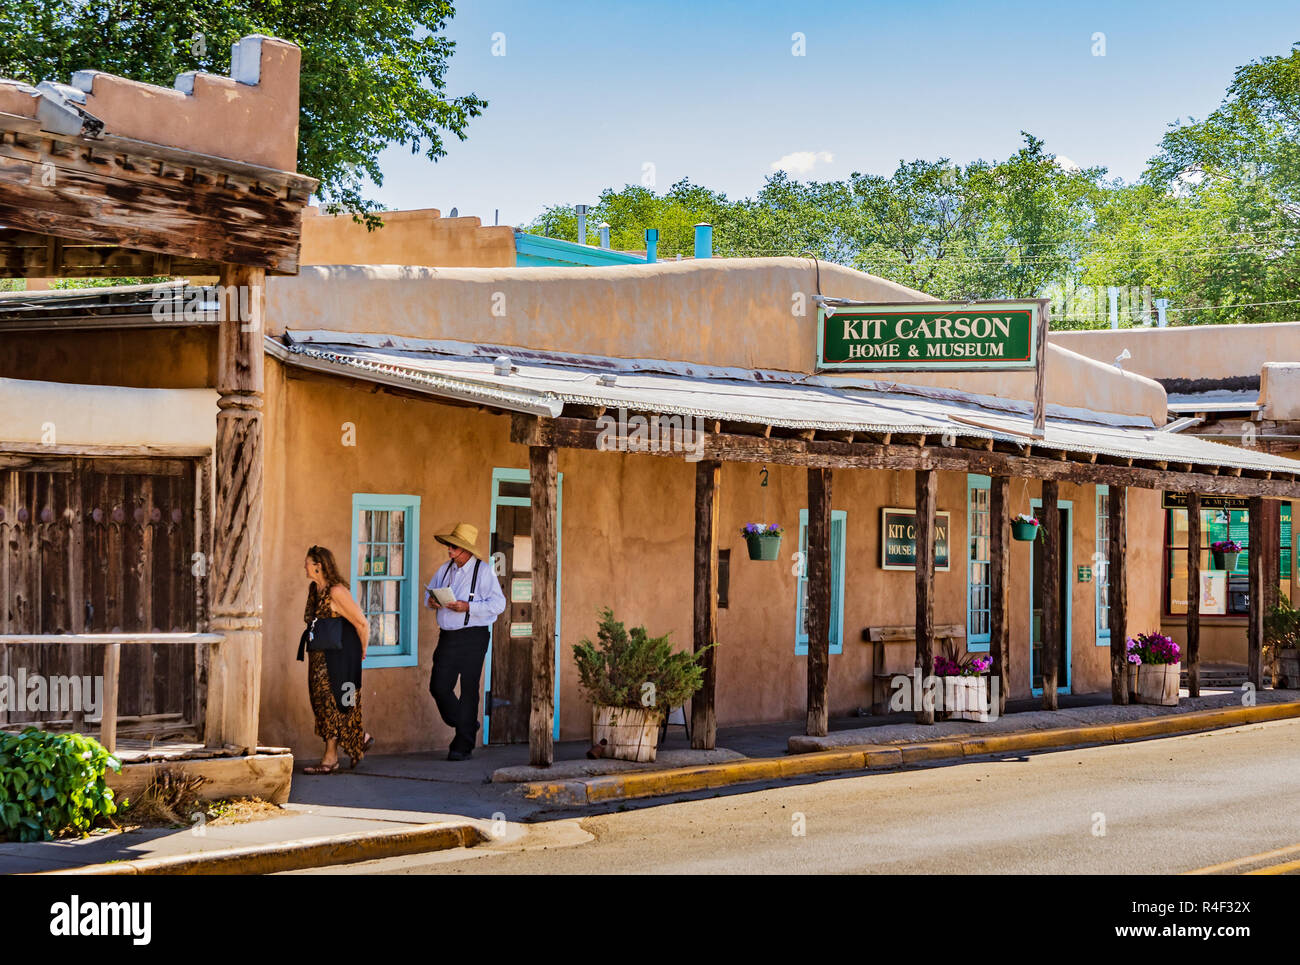 TAOS, NM, USA-07/08/18: The actual Taos home of Kit Carson, now a museum. Stock Photo